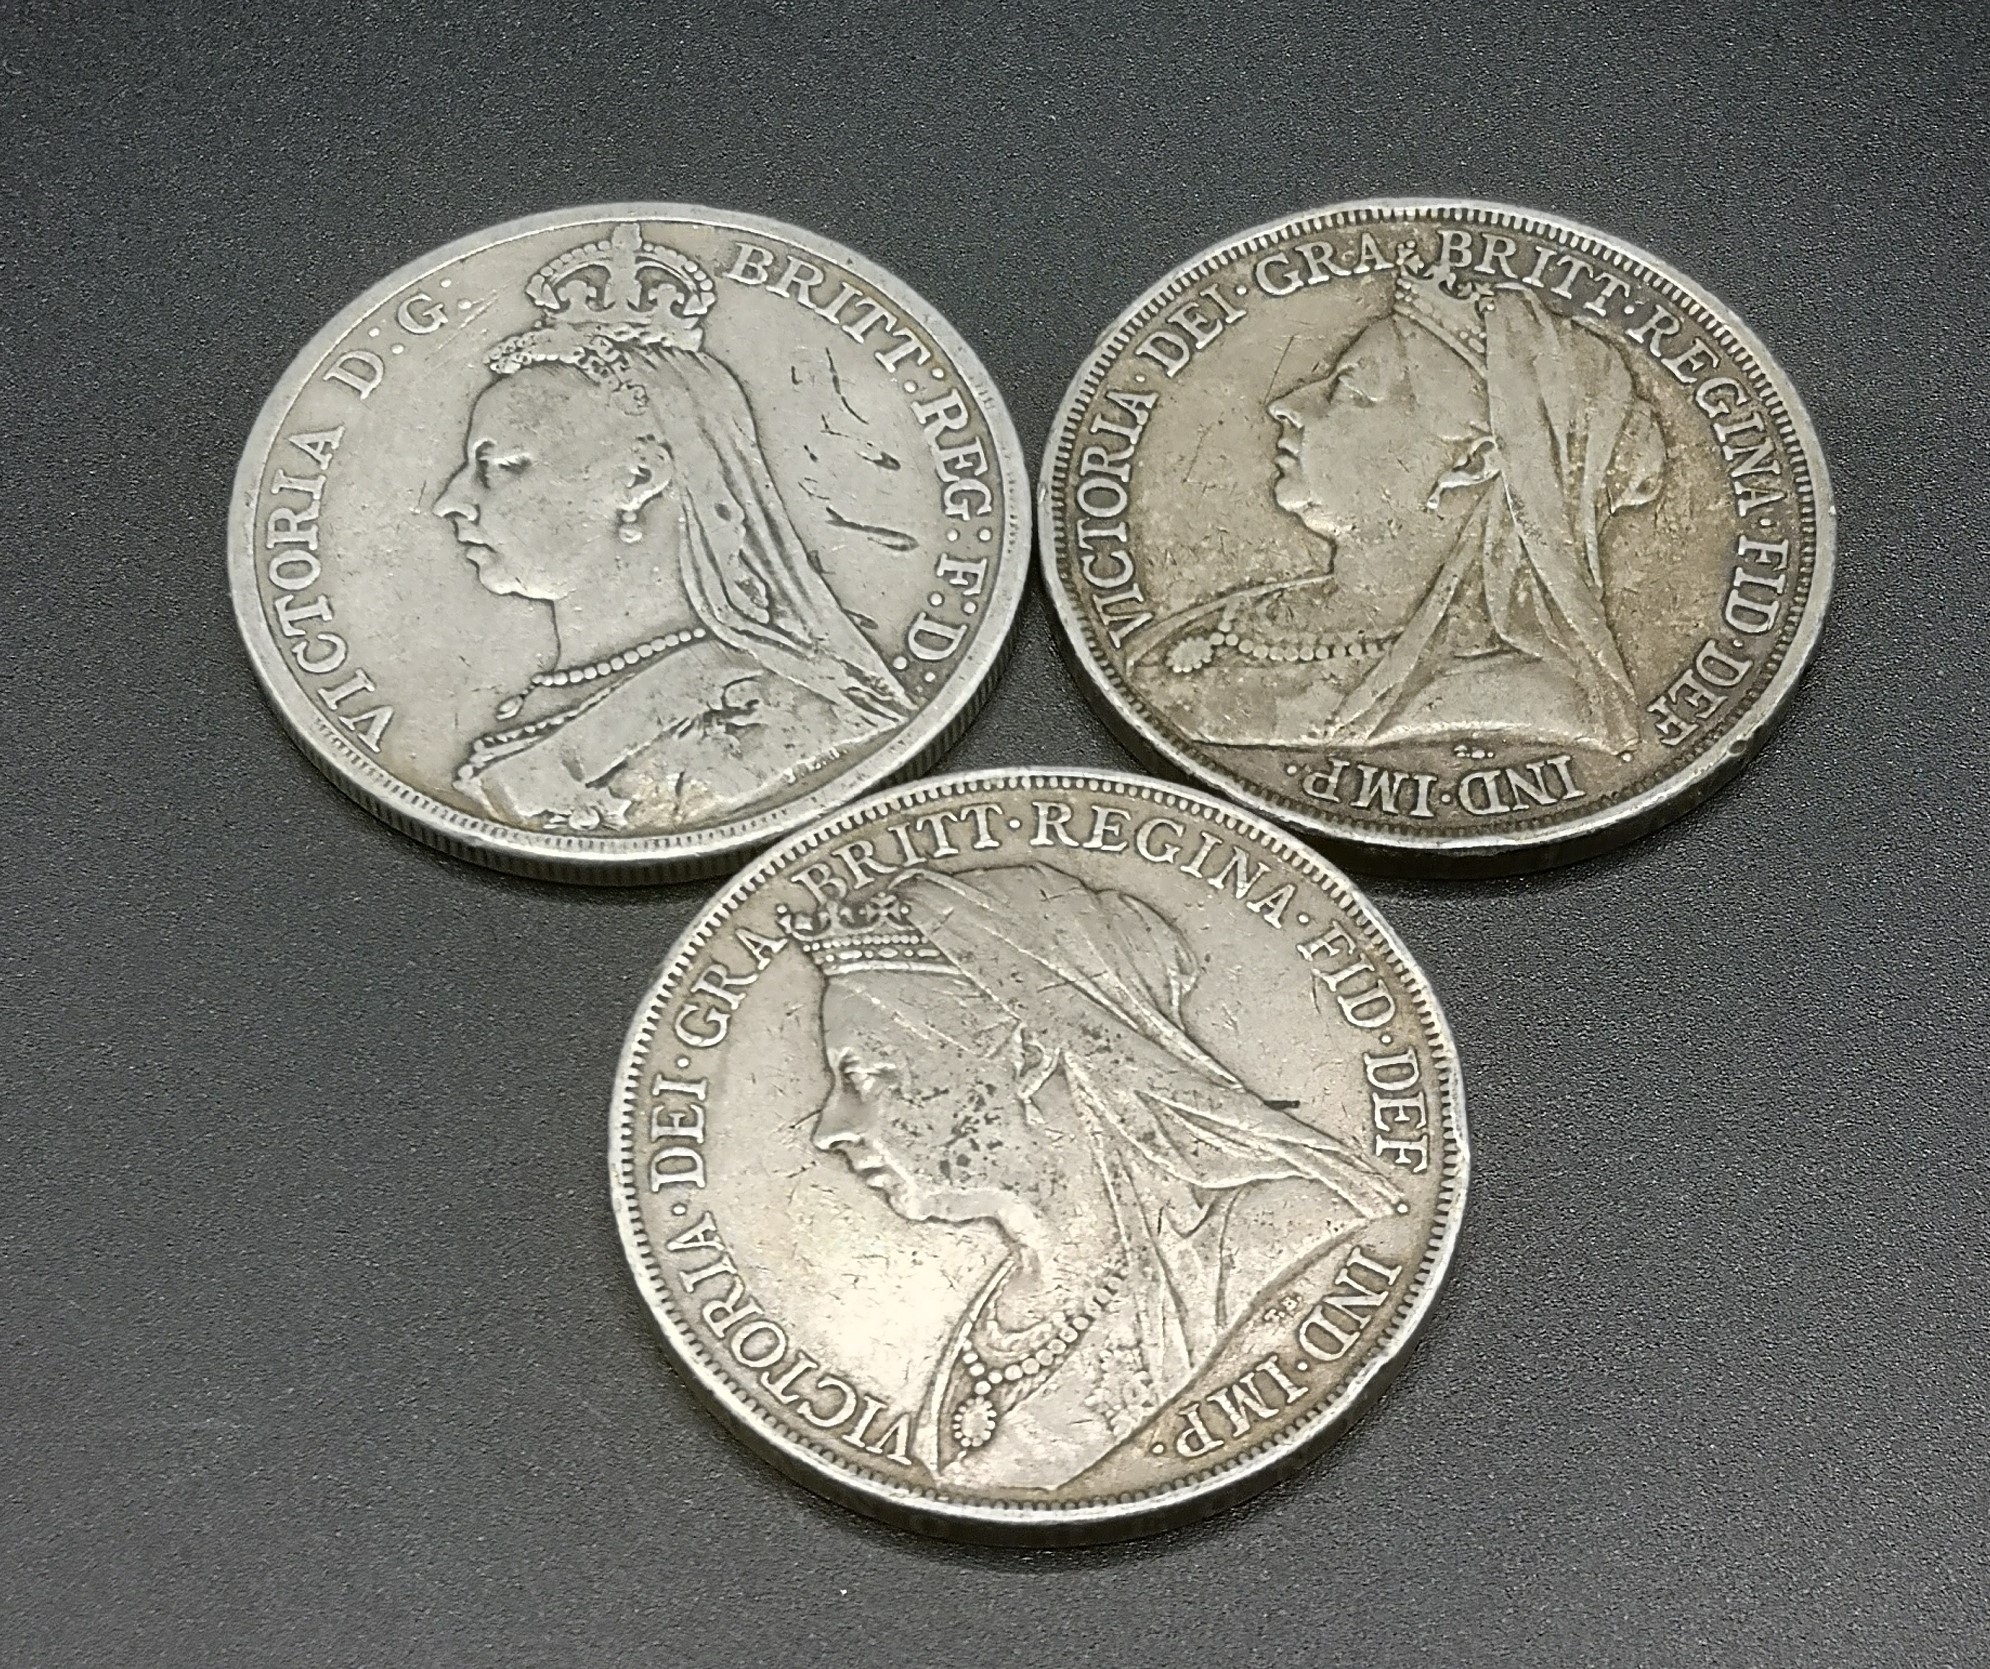 Three Queen Victoria crown coins: 1889, 1893, and 1900